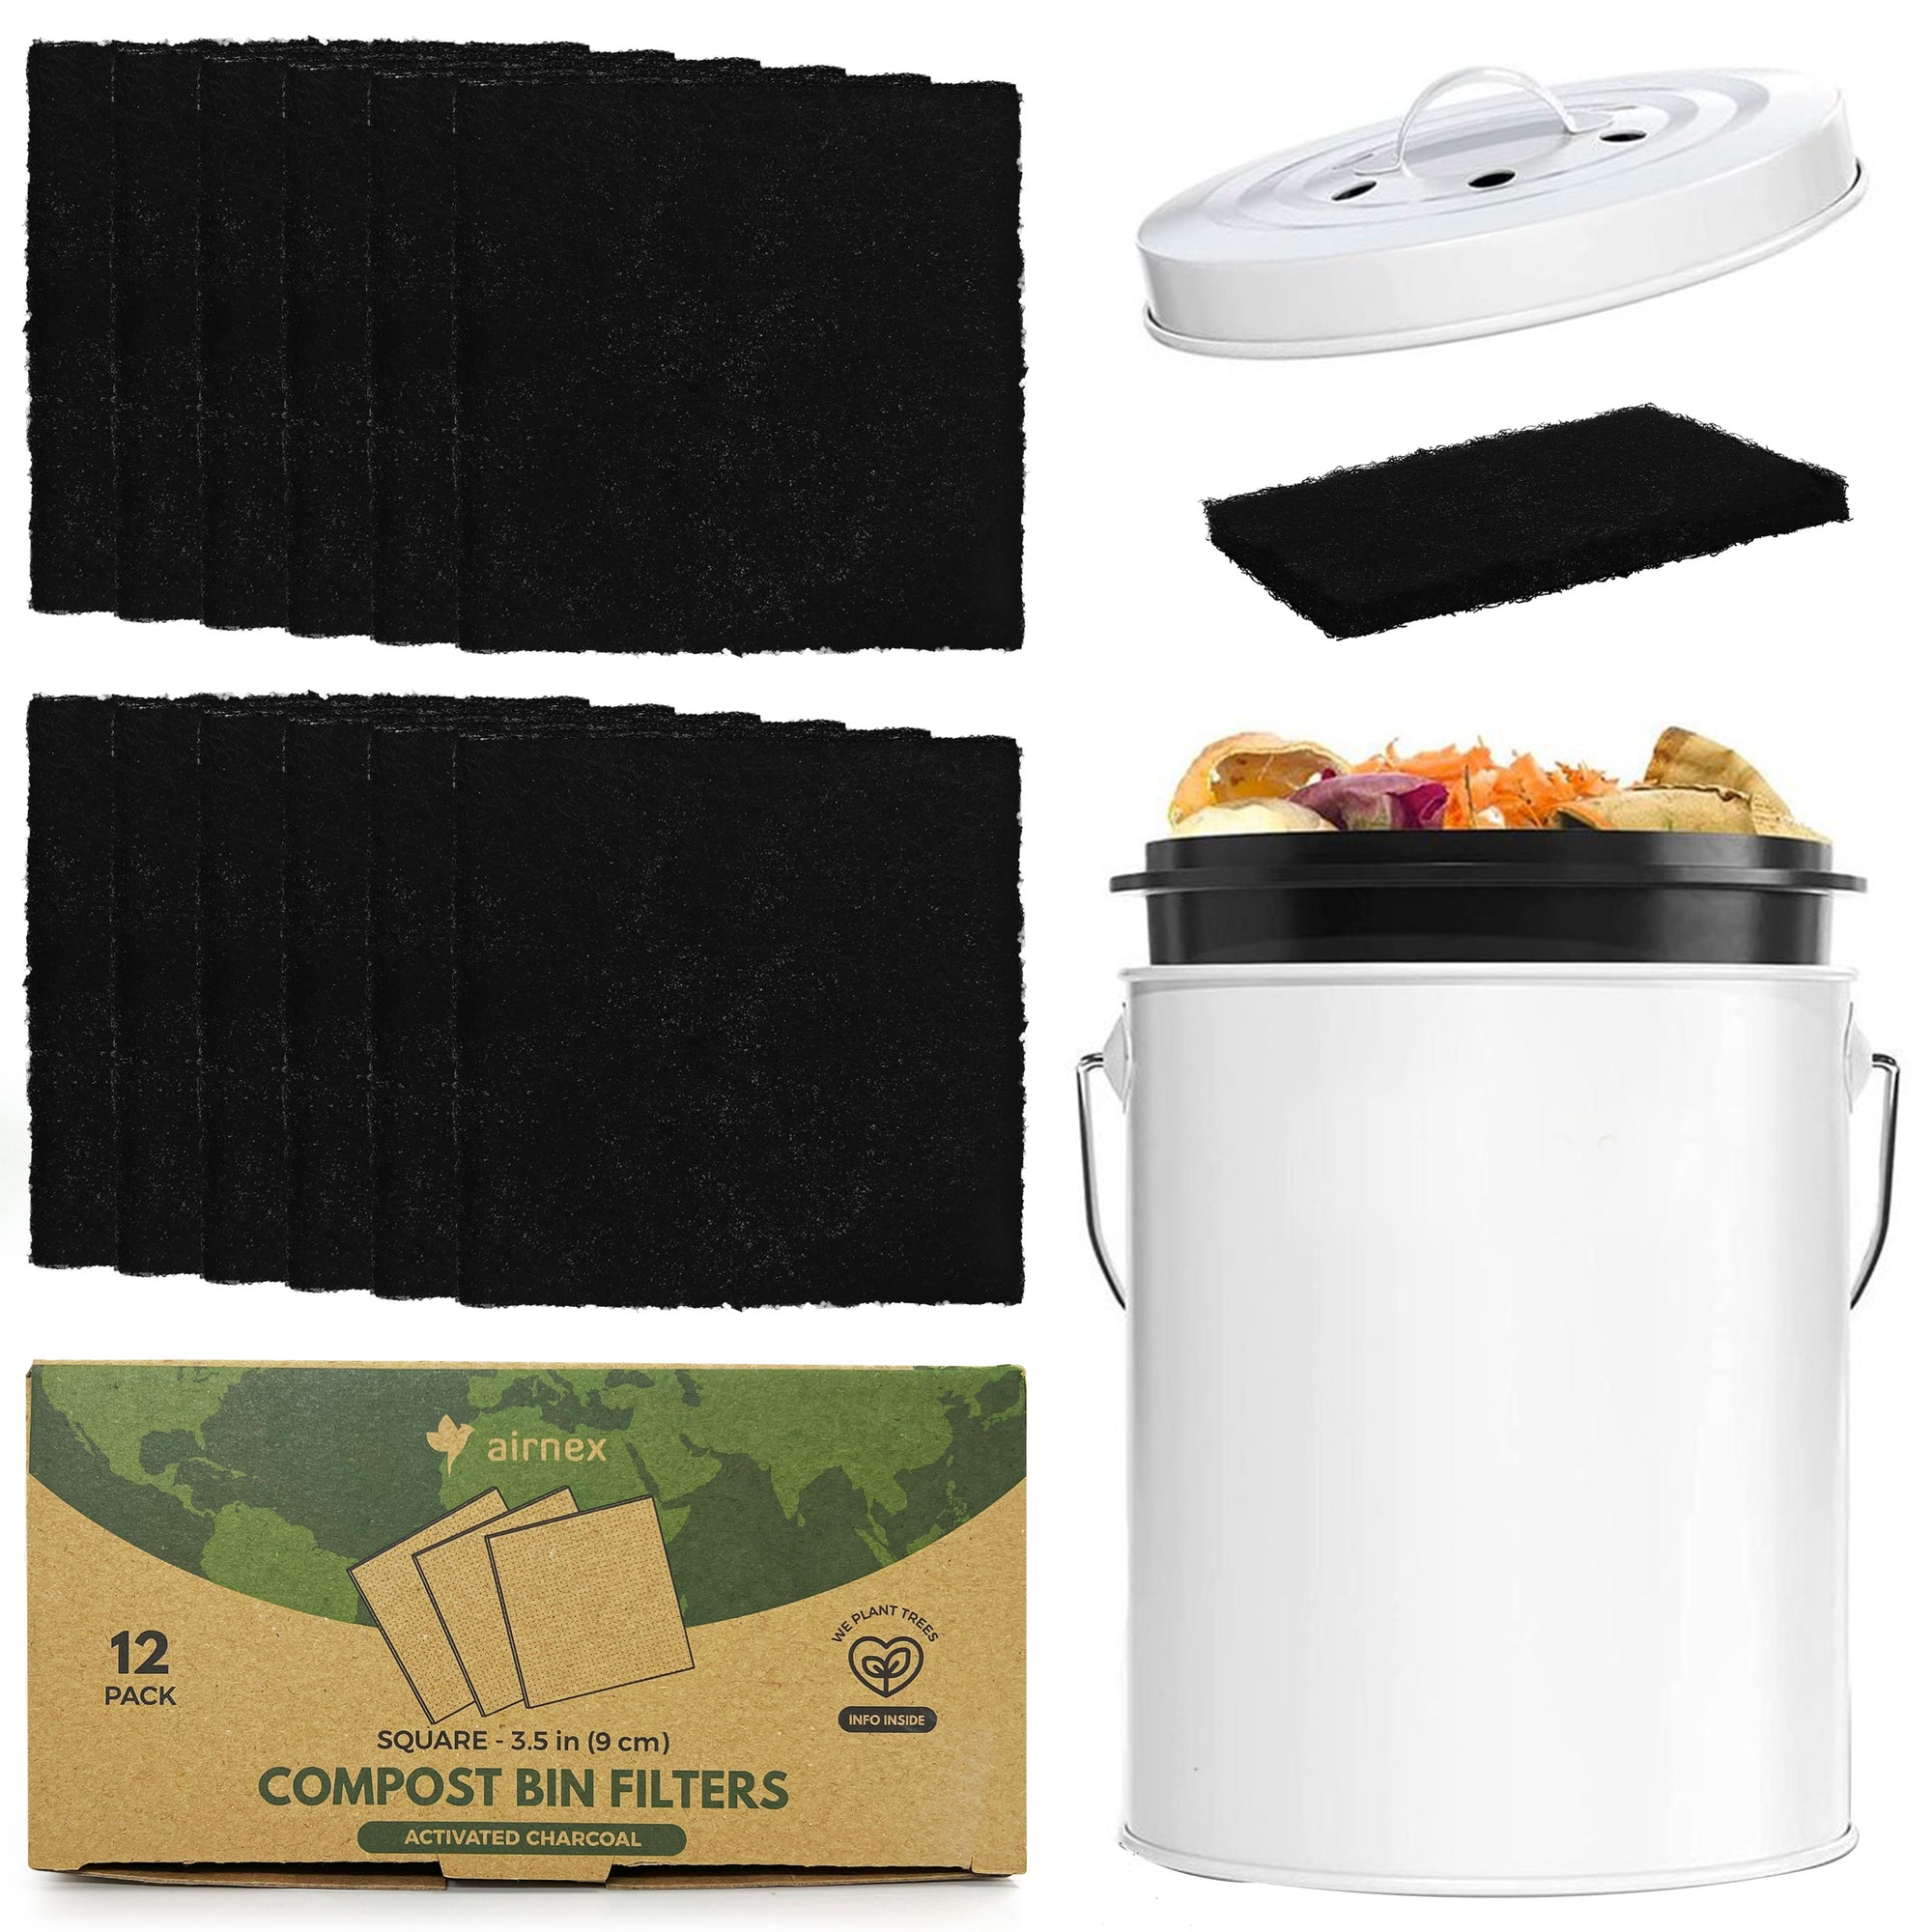 Charcoal Filters for Compost Bin - 3.5 inch